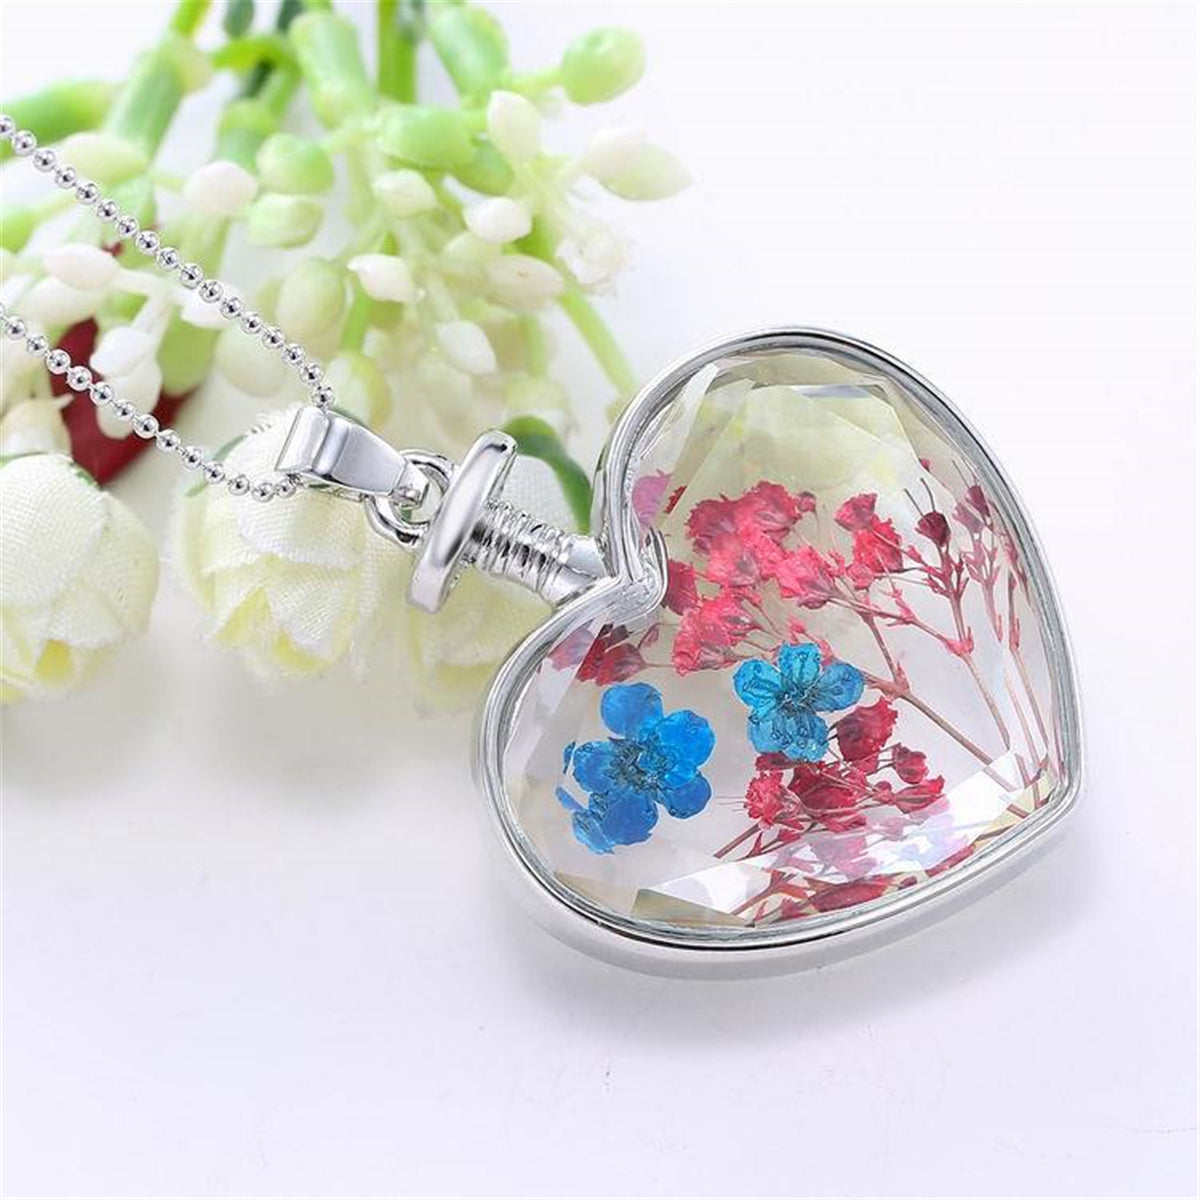 Pink & Blue Peach Blossom Heart Pendant Necklace